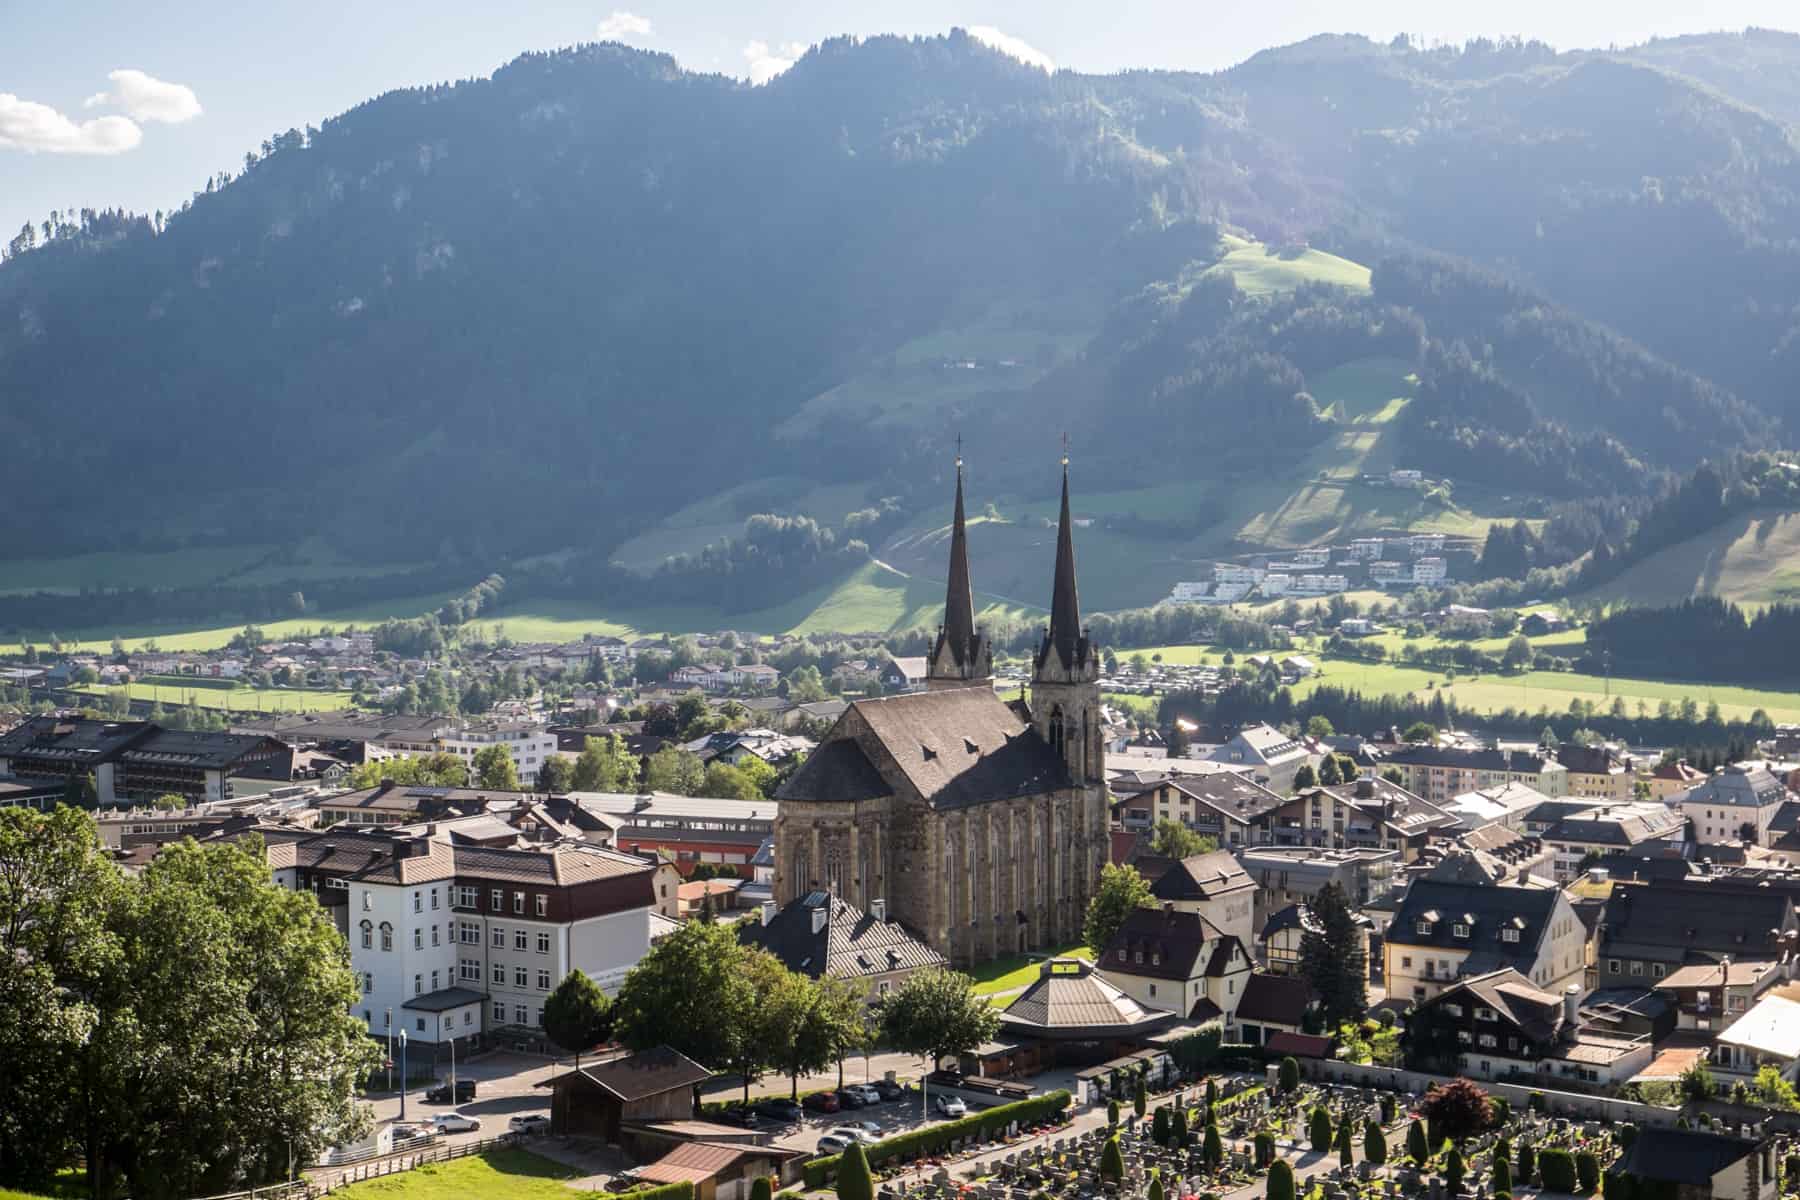 The twin-towers of the Cathedral, Pongauer Dom, in St. Johann im Pongau in Salzburg in Austria, dominate the city spread surrounding it in front of the low mountains in front